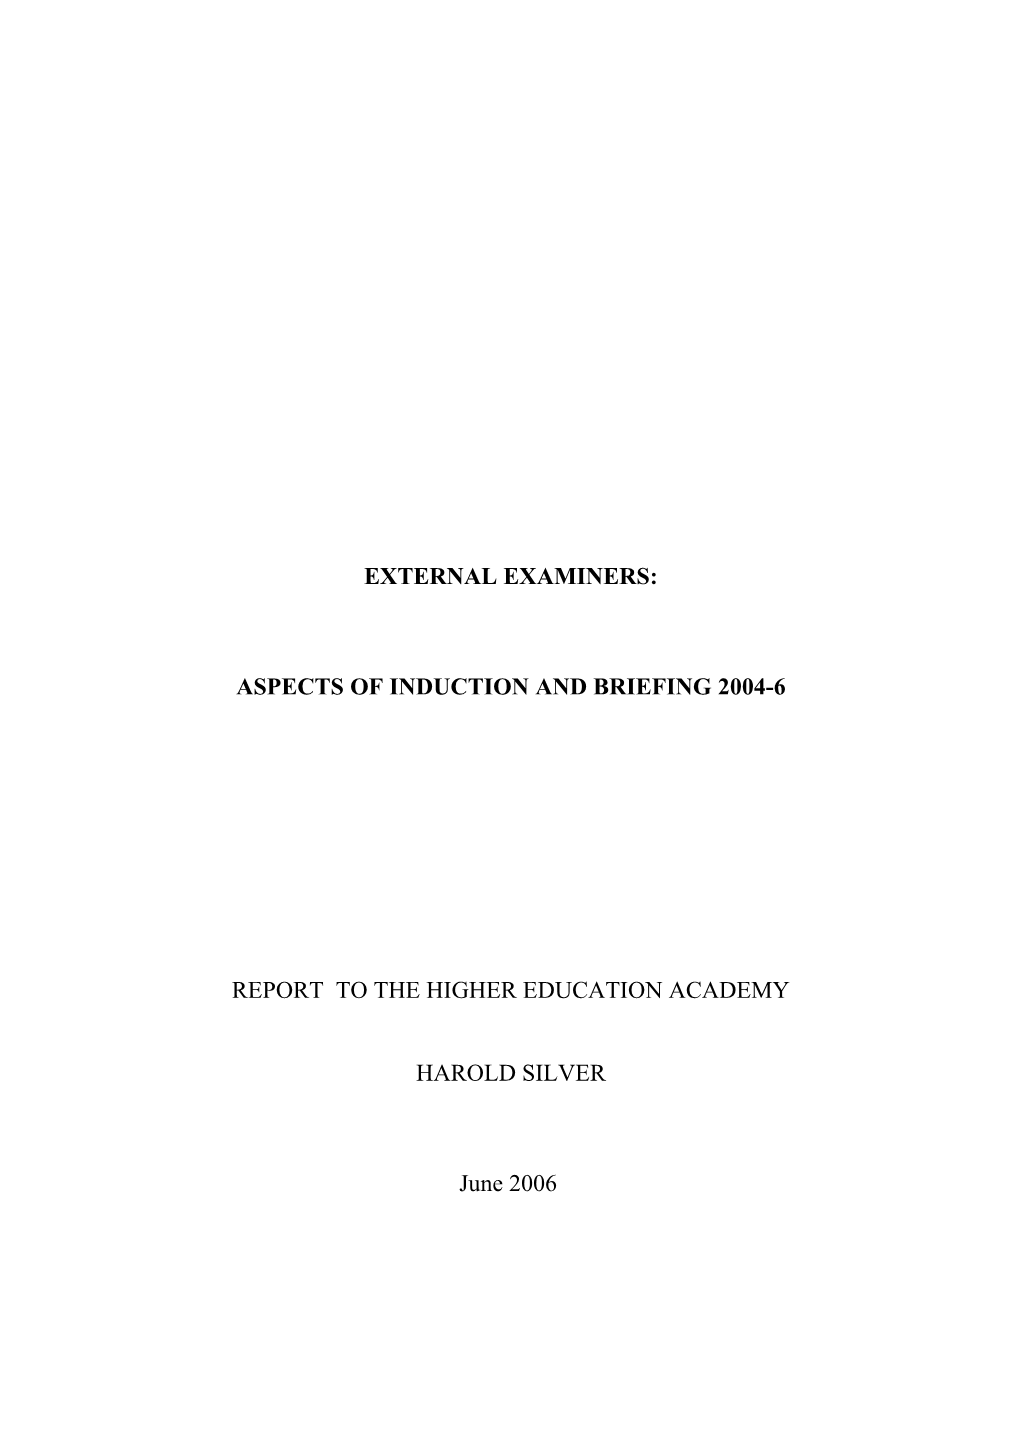 Aspects of the Induction of External Examiners 2004-6